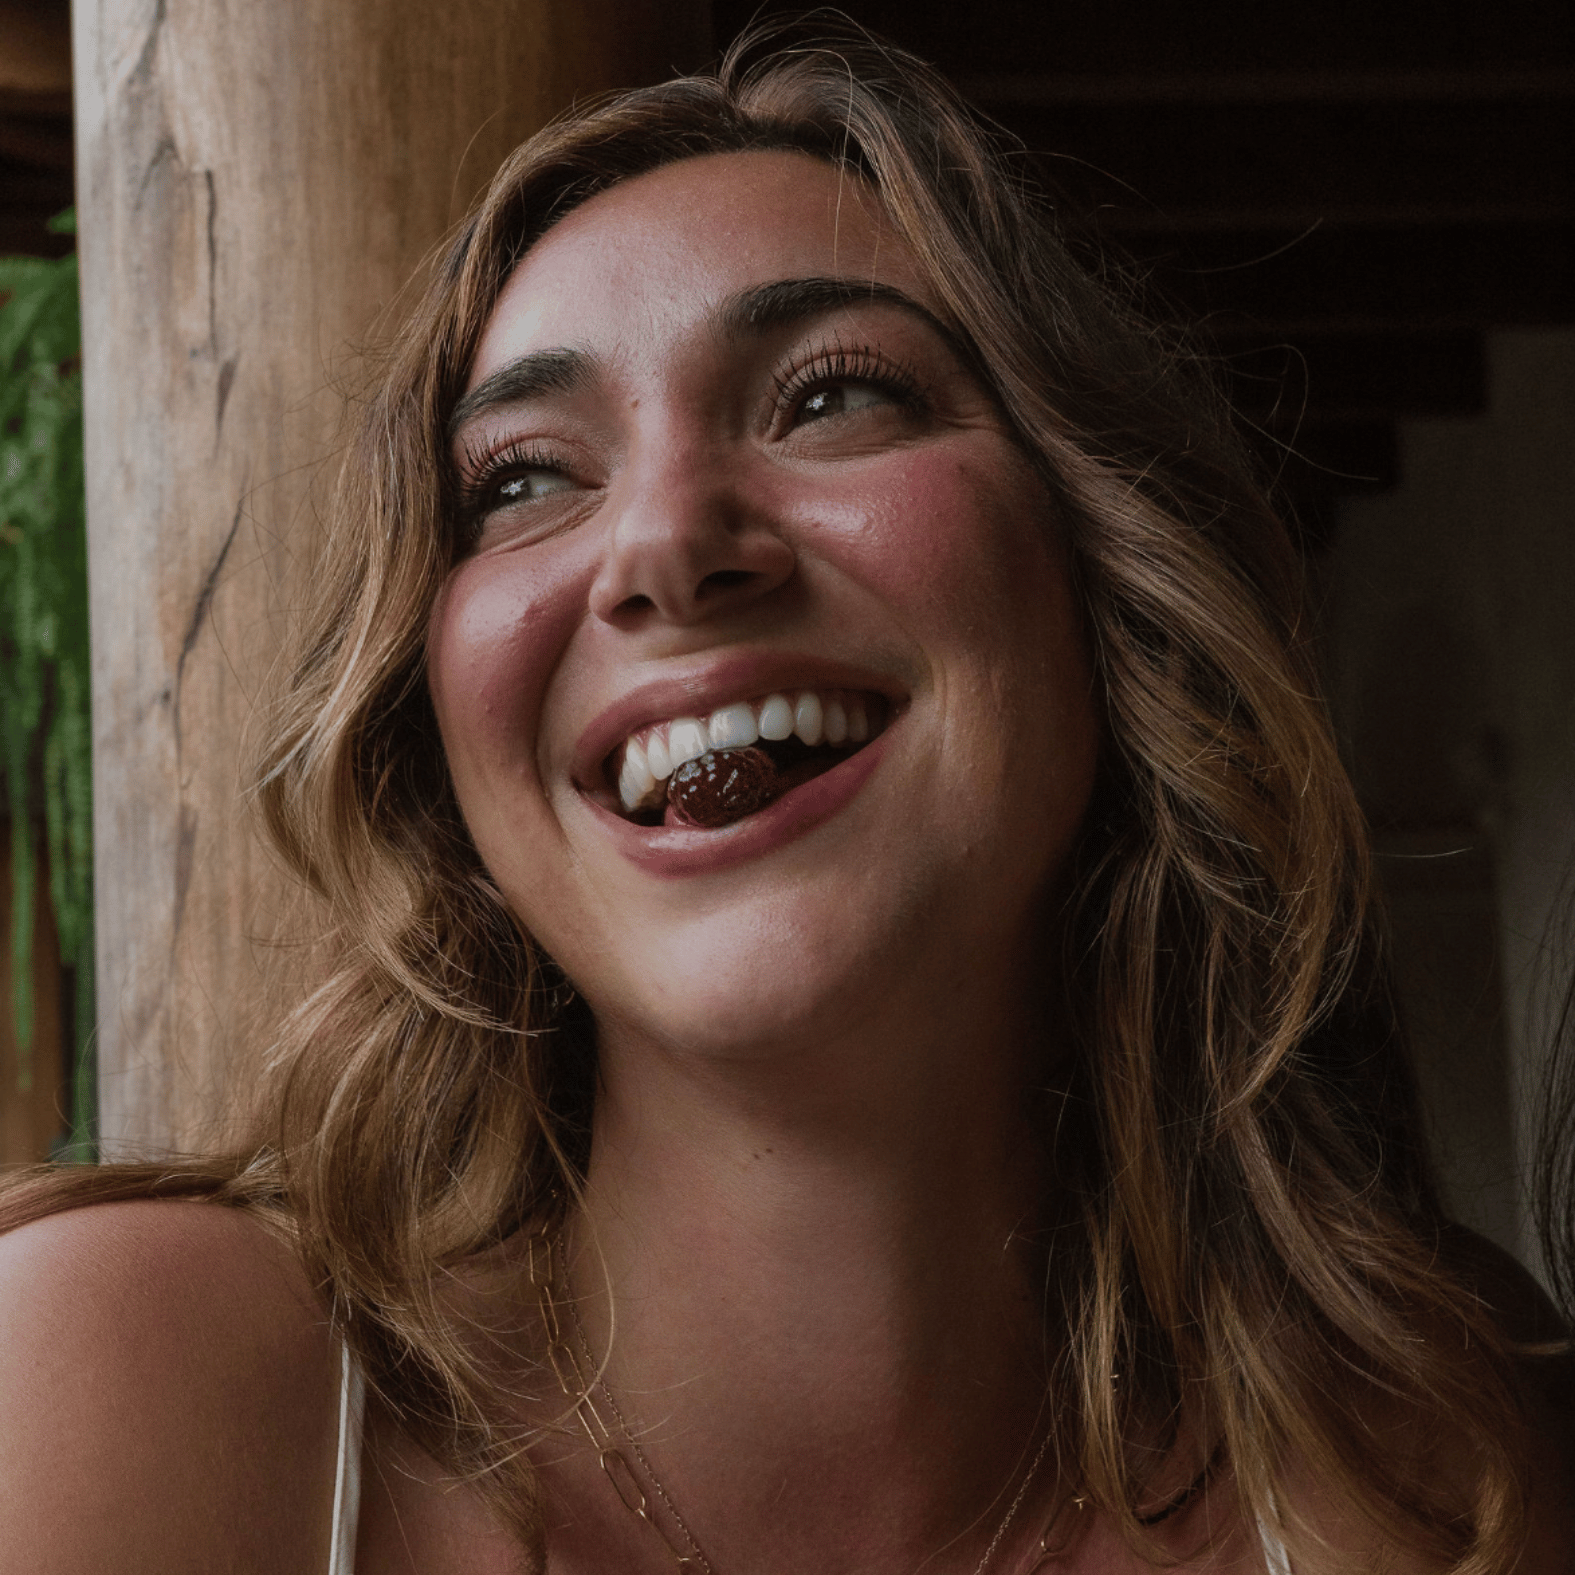 woman smiling showing a gummy between her teeth.